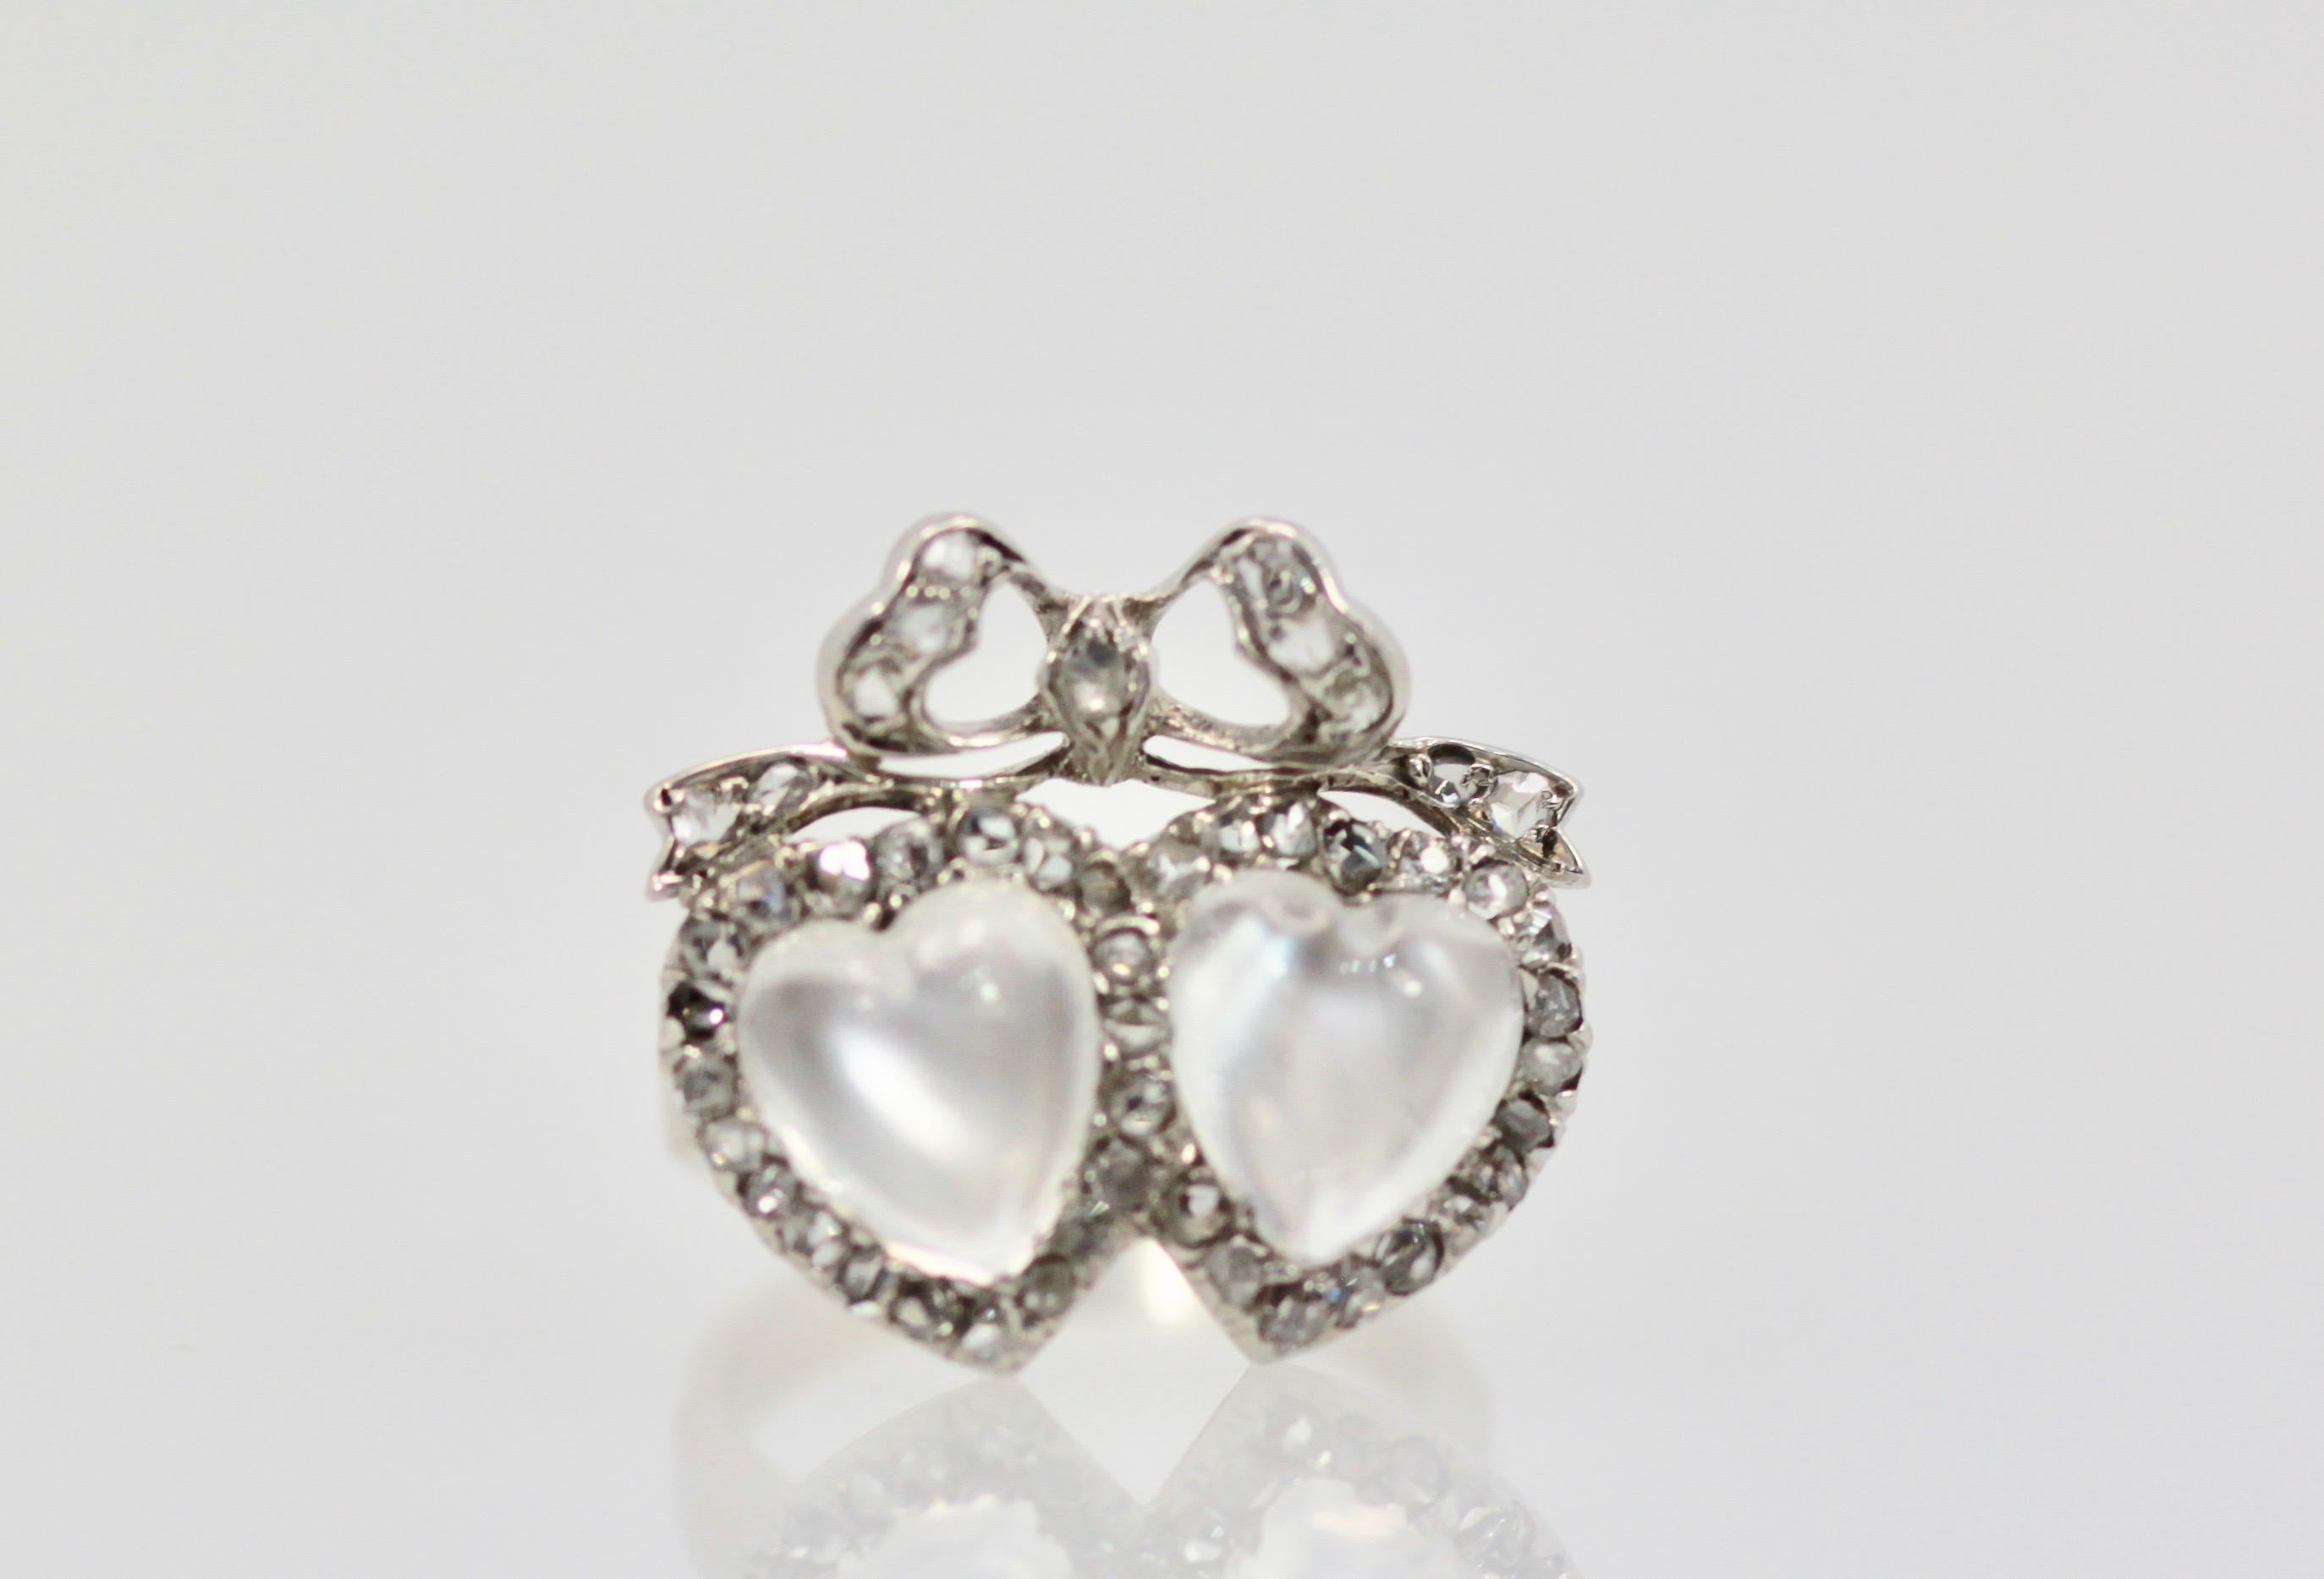 This lovely Victorian double heart moonstone ring is set in Platinum and 18K white gold.  To further enhance it there is a Diamond bow centered on top.  This motif is very Victorian and I purchased this out of England where Victorian/Edwardian